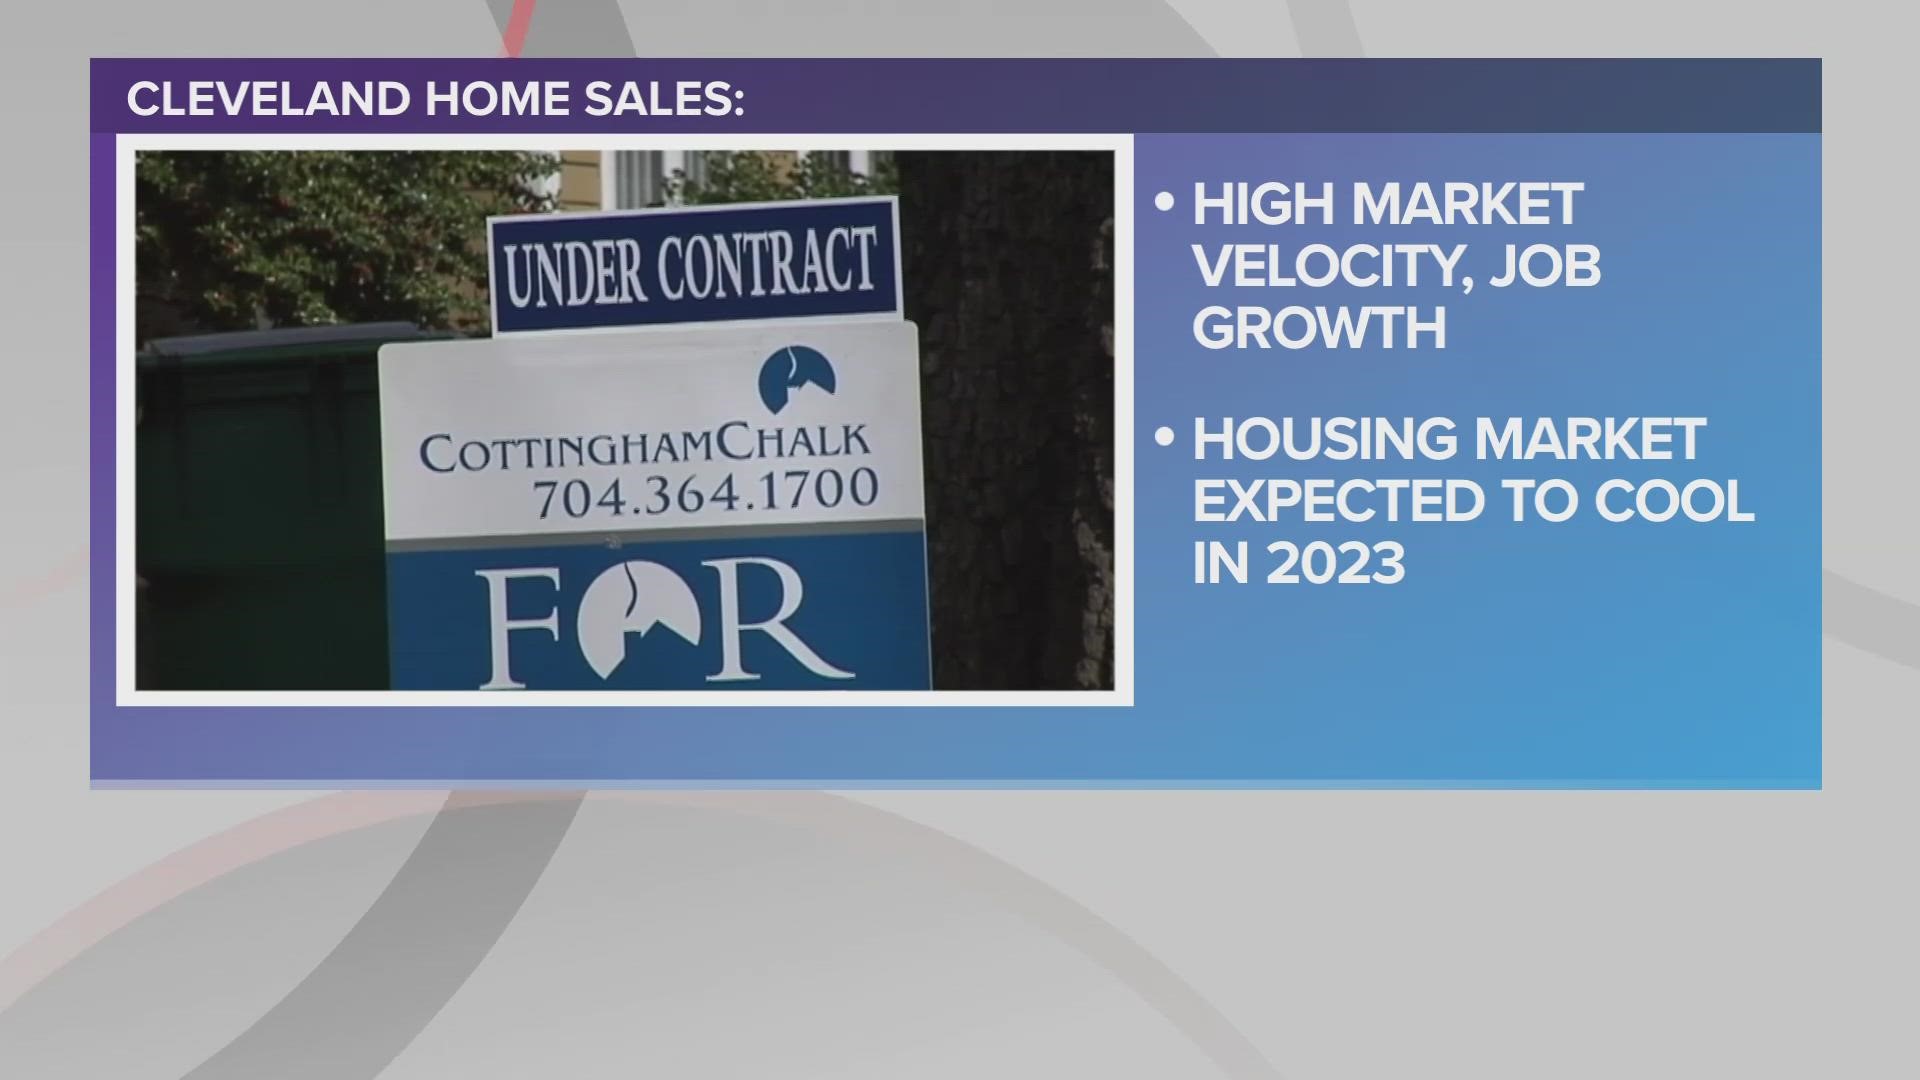 Cleveland is expected to see high demand in 2023. Zillow predicts home sales to end quickly once on the market.